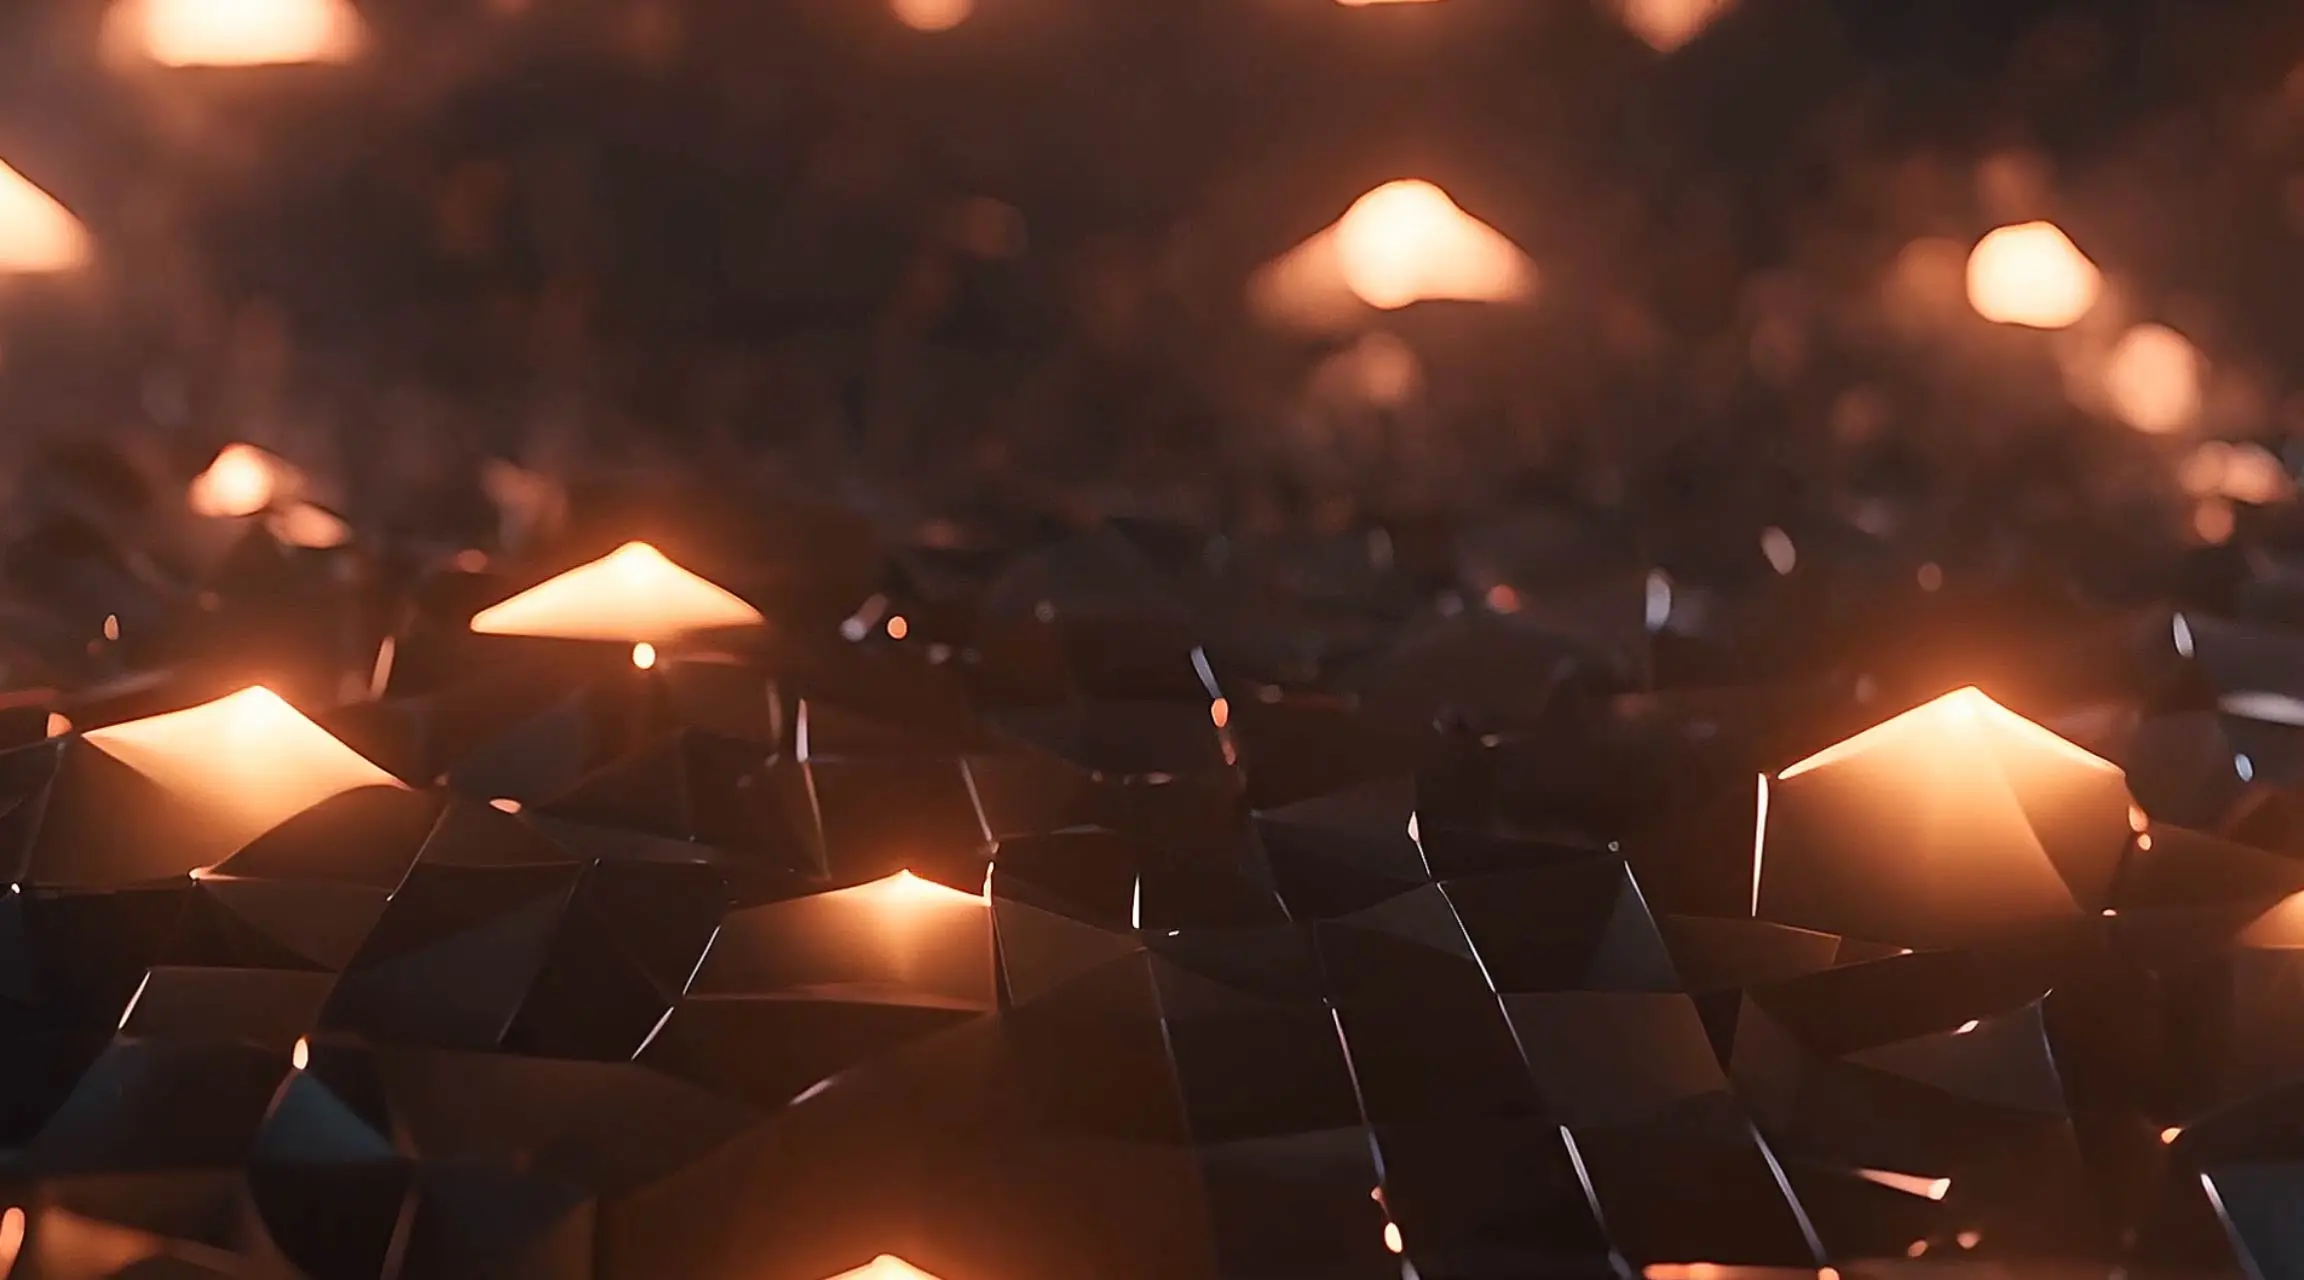 Geometric Glow Abstract Shapes with Warm Light Animation